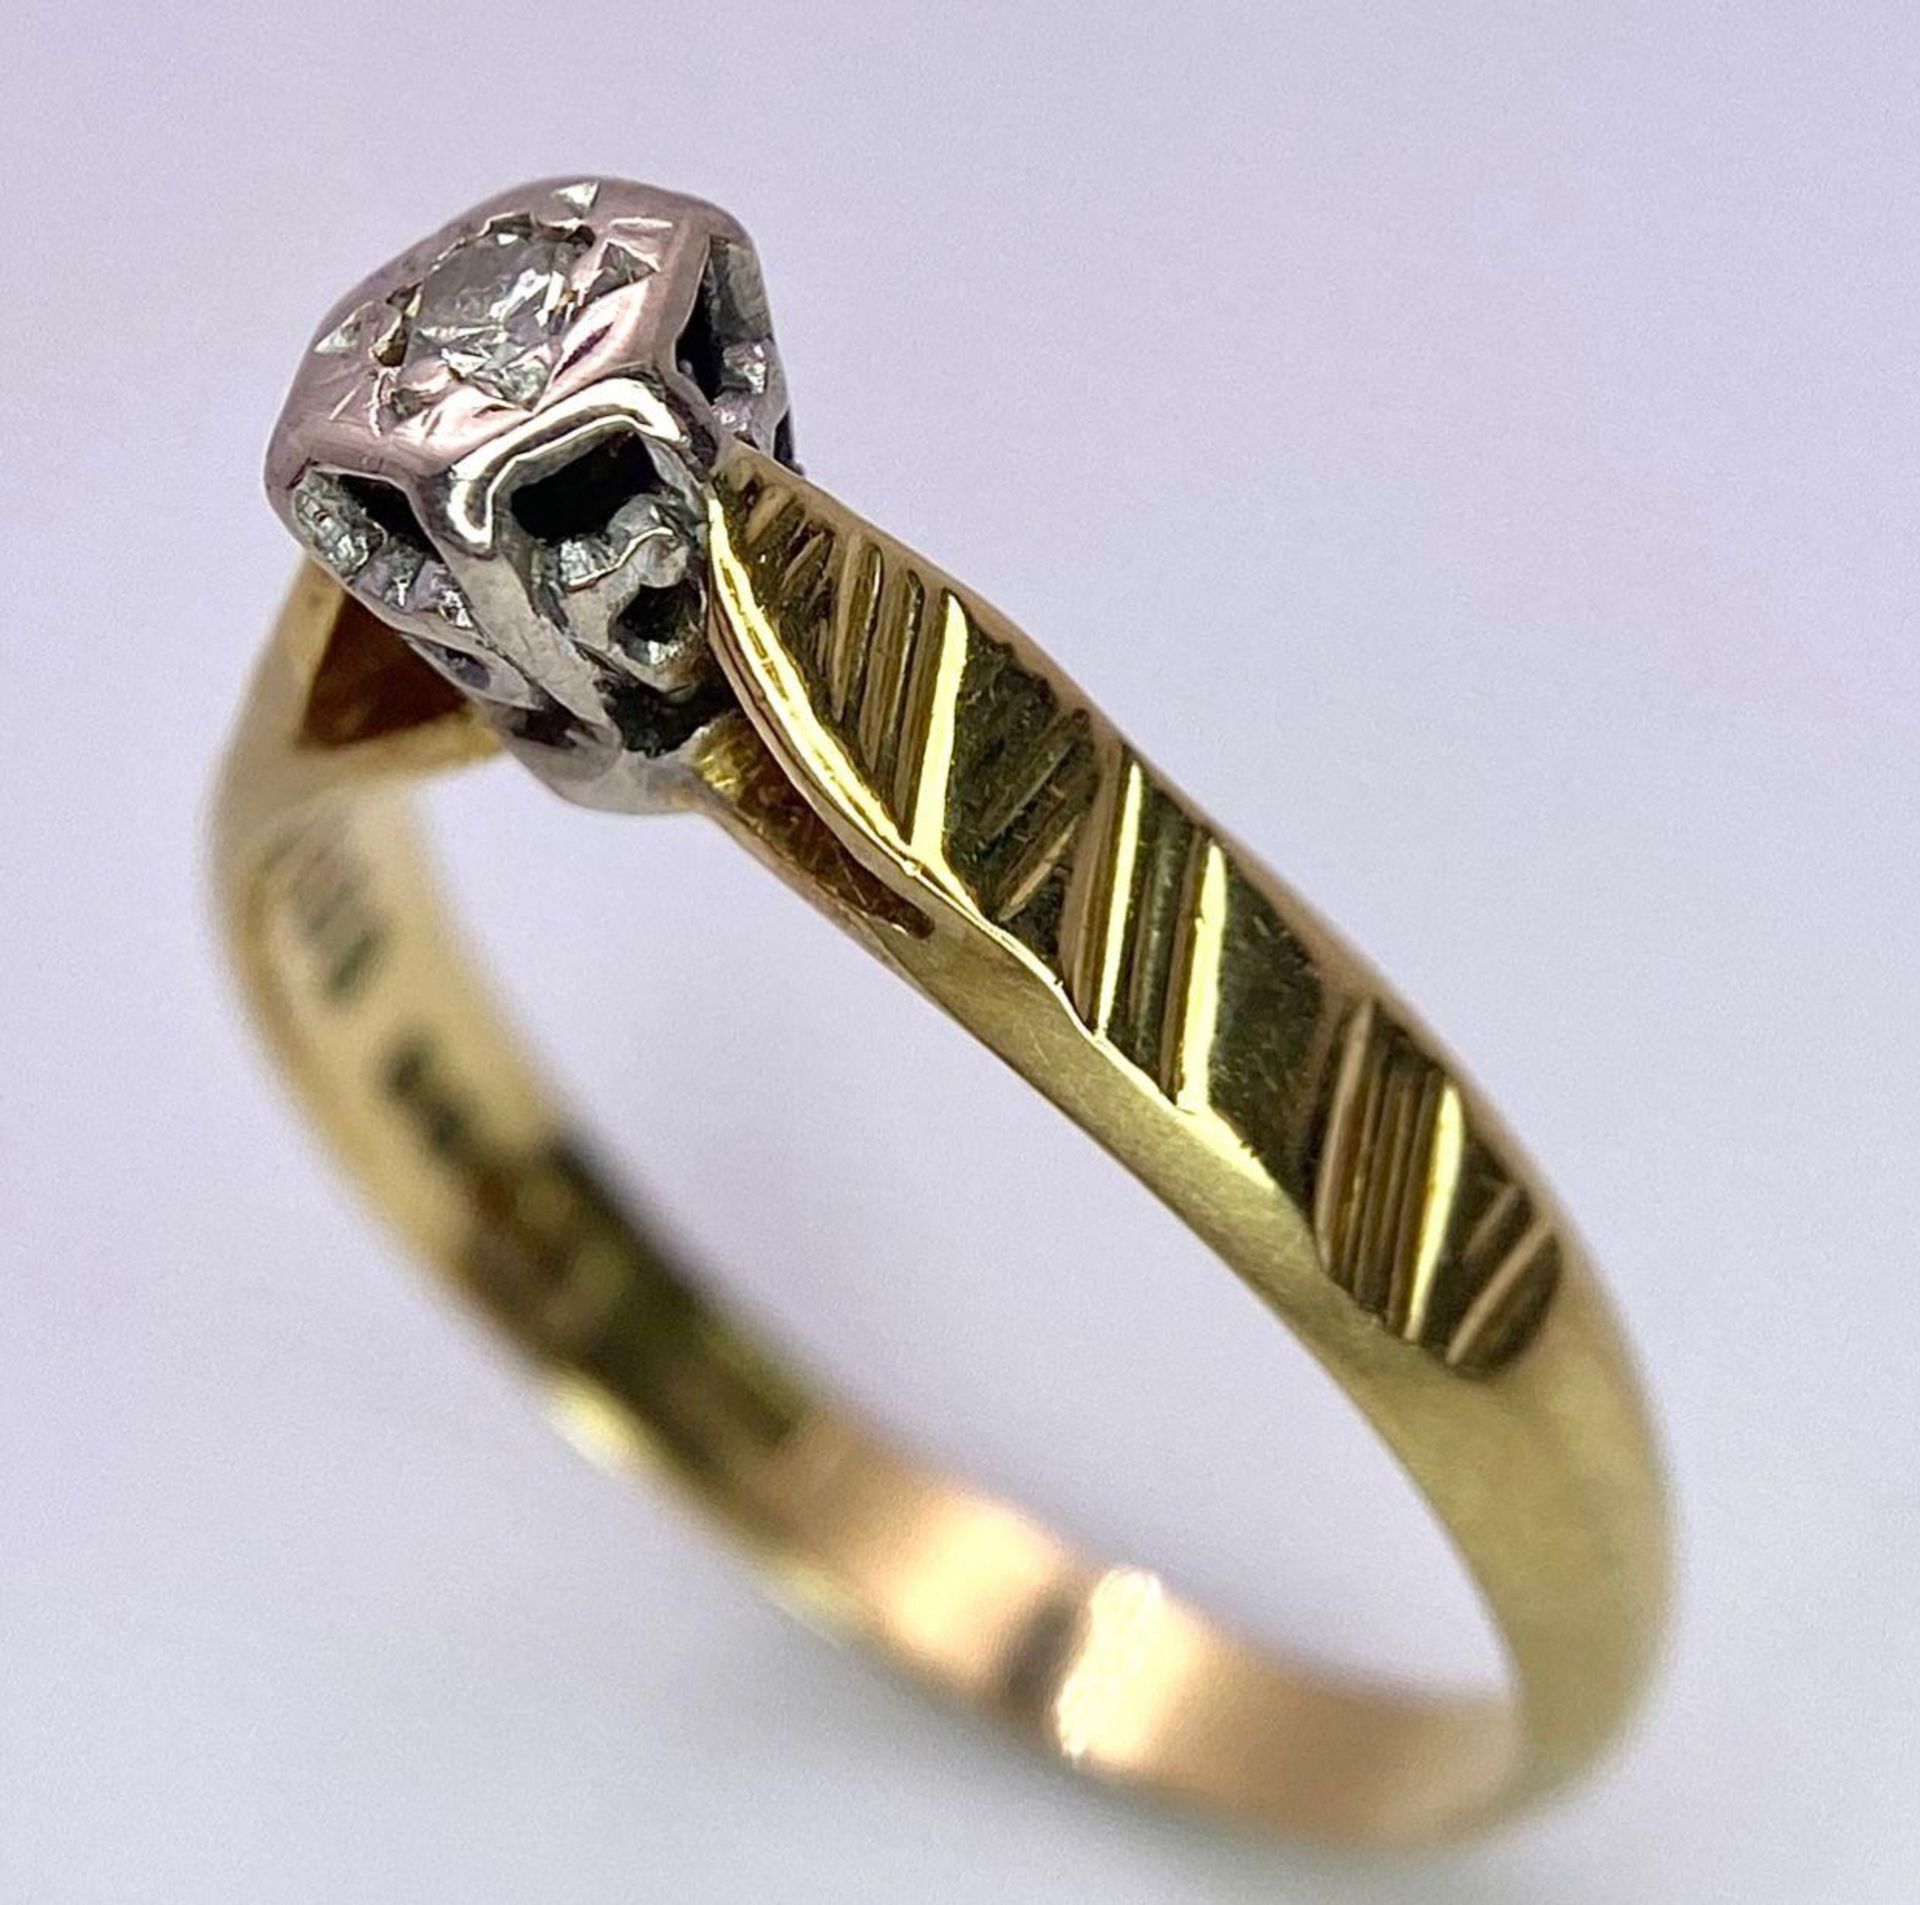 A Vintage 18K Yellow Gold Diamond Solitaire Ring. Size L. 2.41g total weight. Full UK hallmarks. - Image 3 of 5